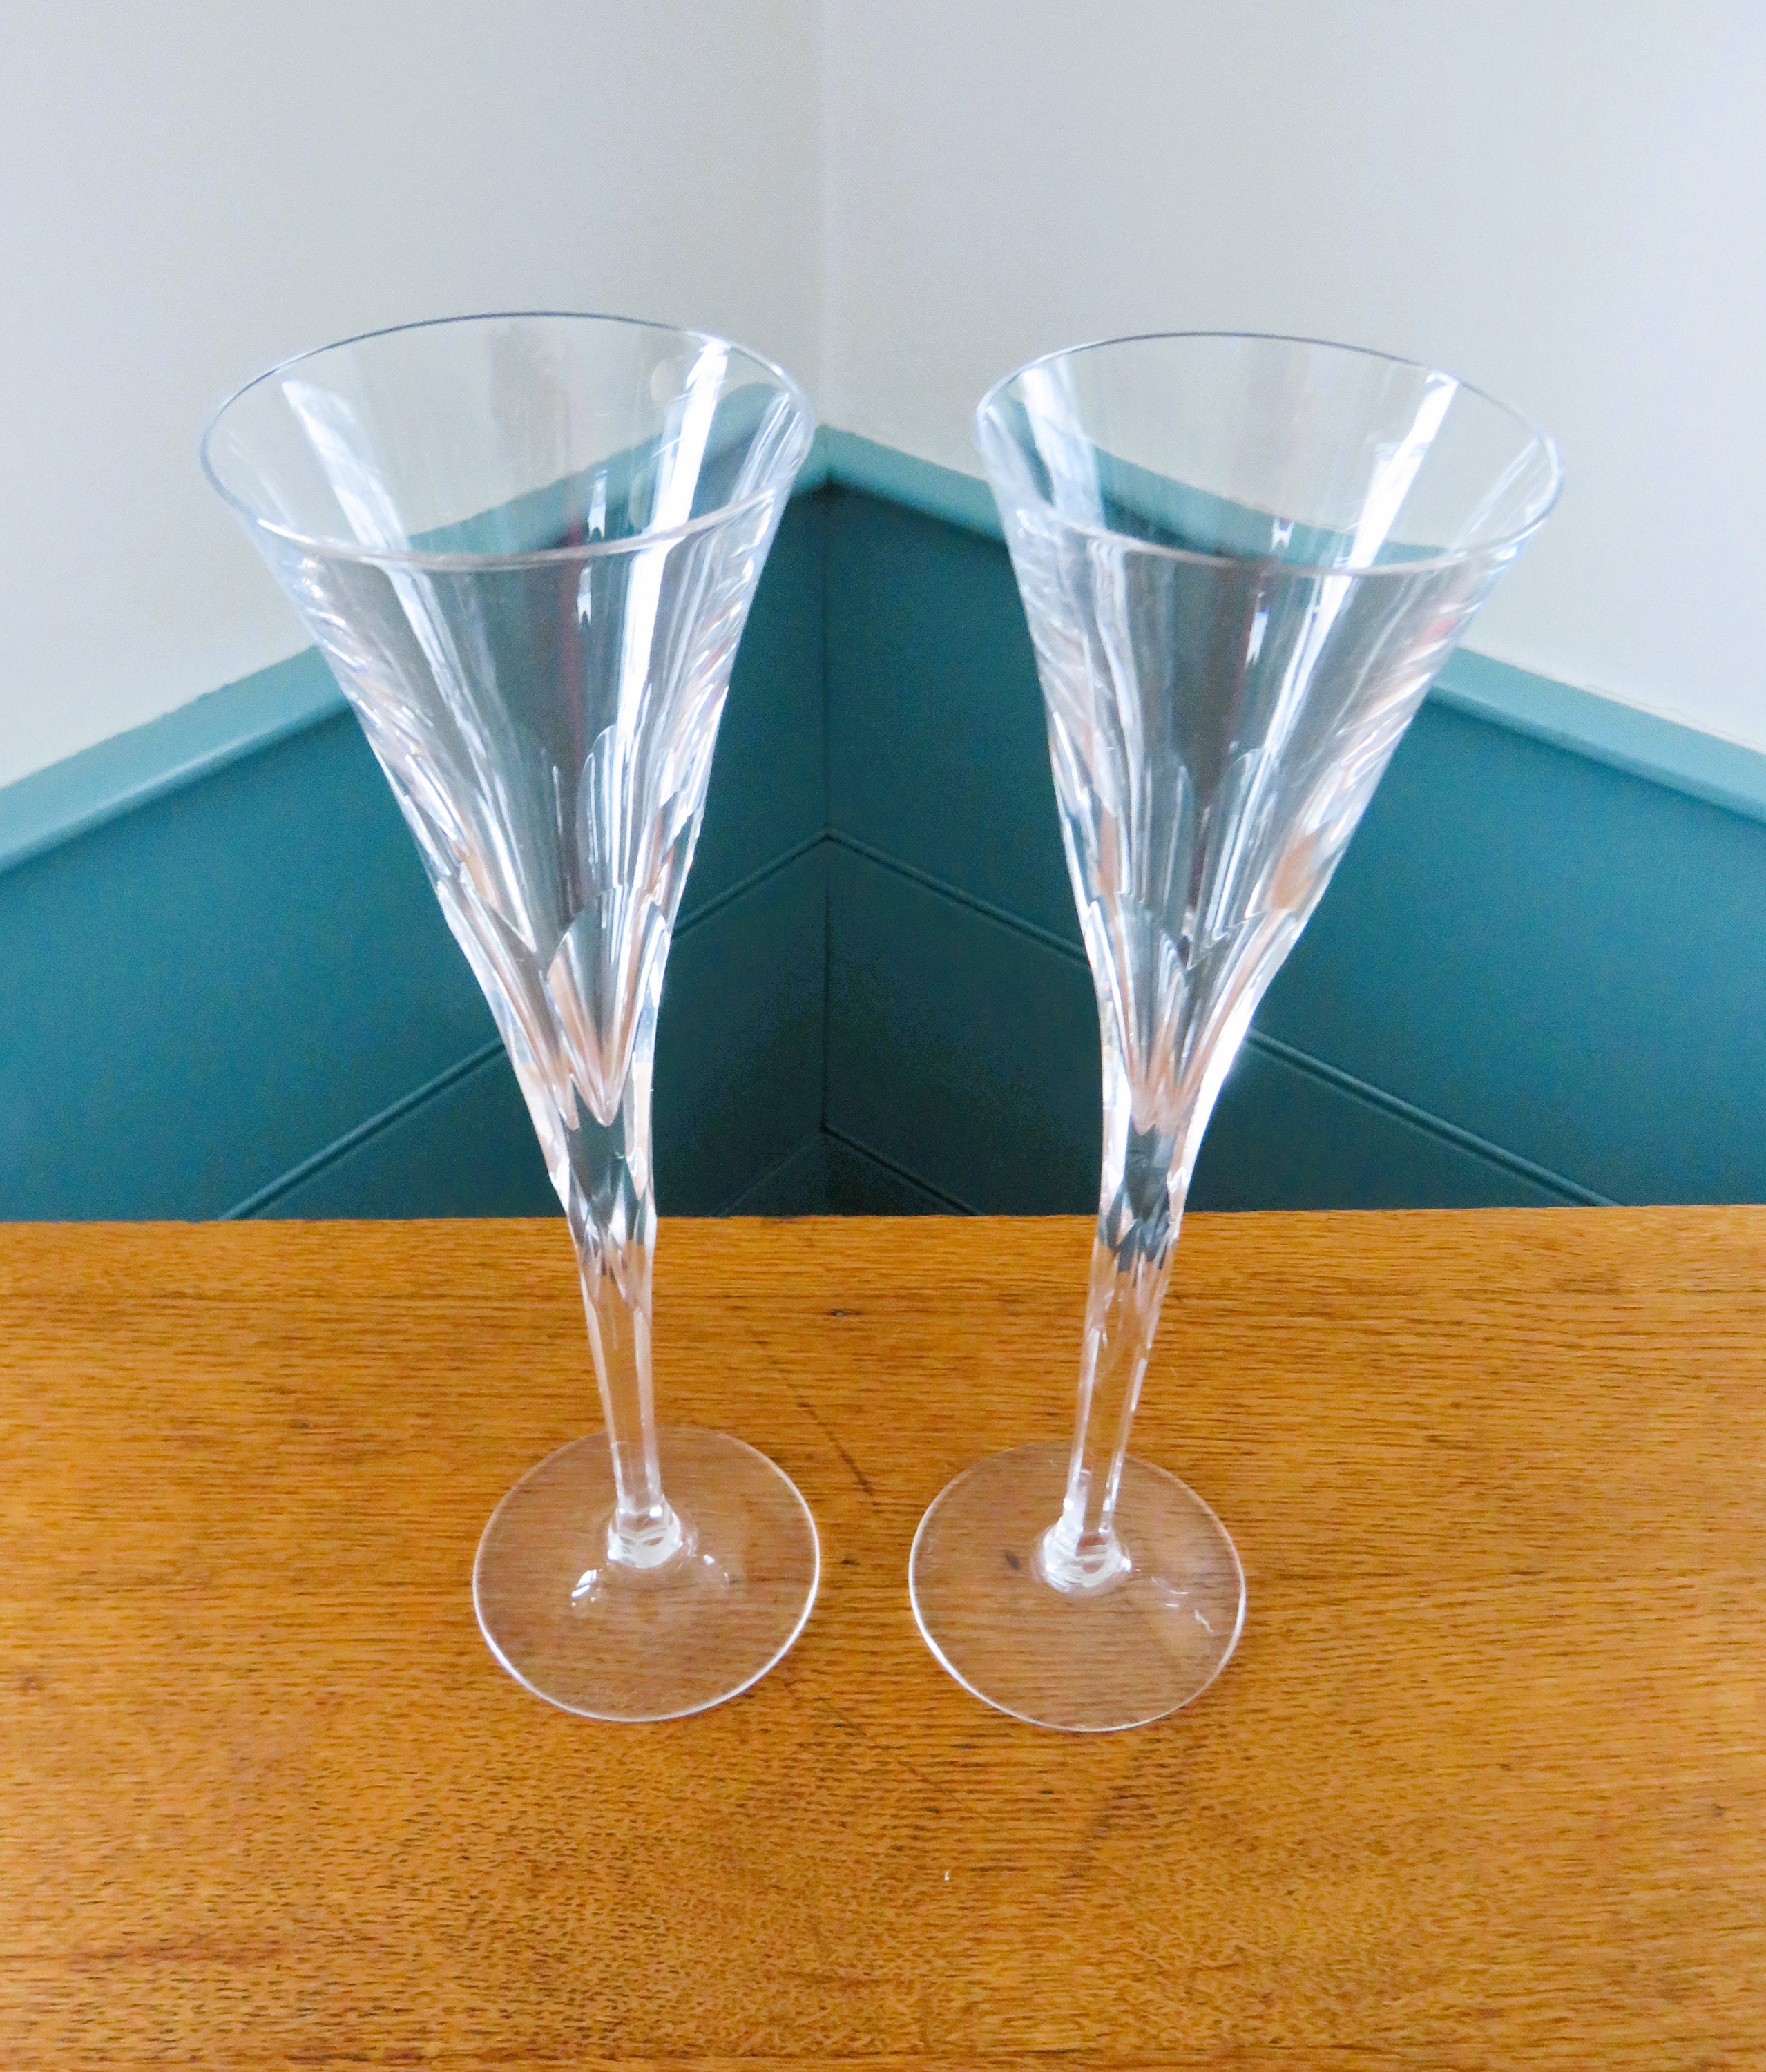 SET of 6 Cut Glass Cocktail Glasses, Berries, Stems, Leaves, 5 1/2 Tall, 2  7/8 Diameter, 3 Ounces 